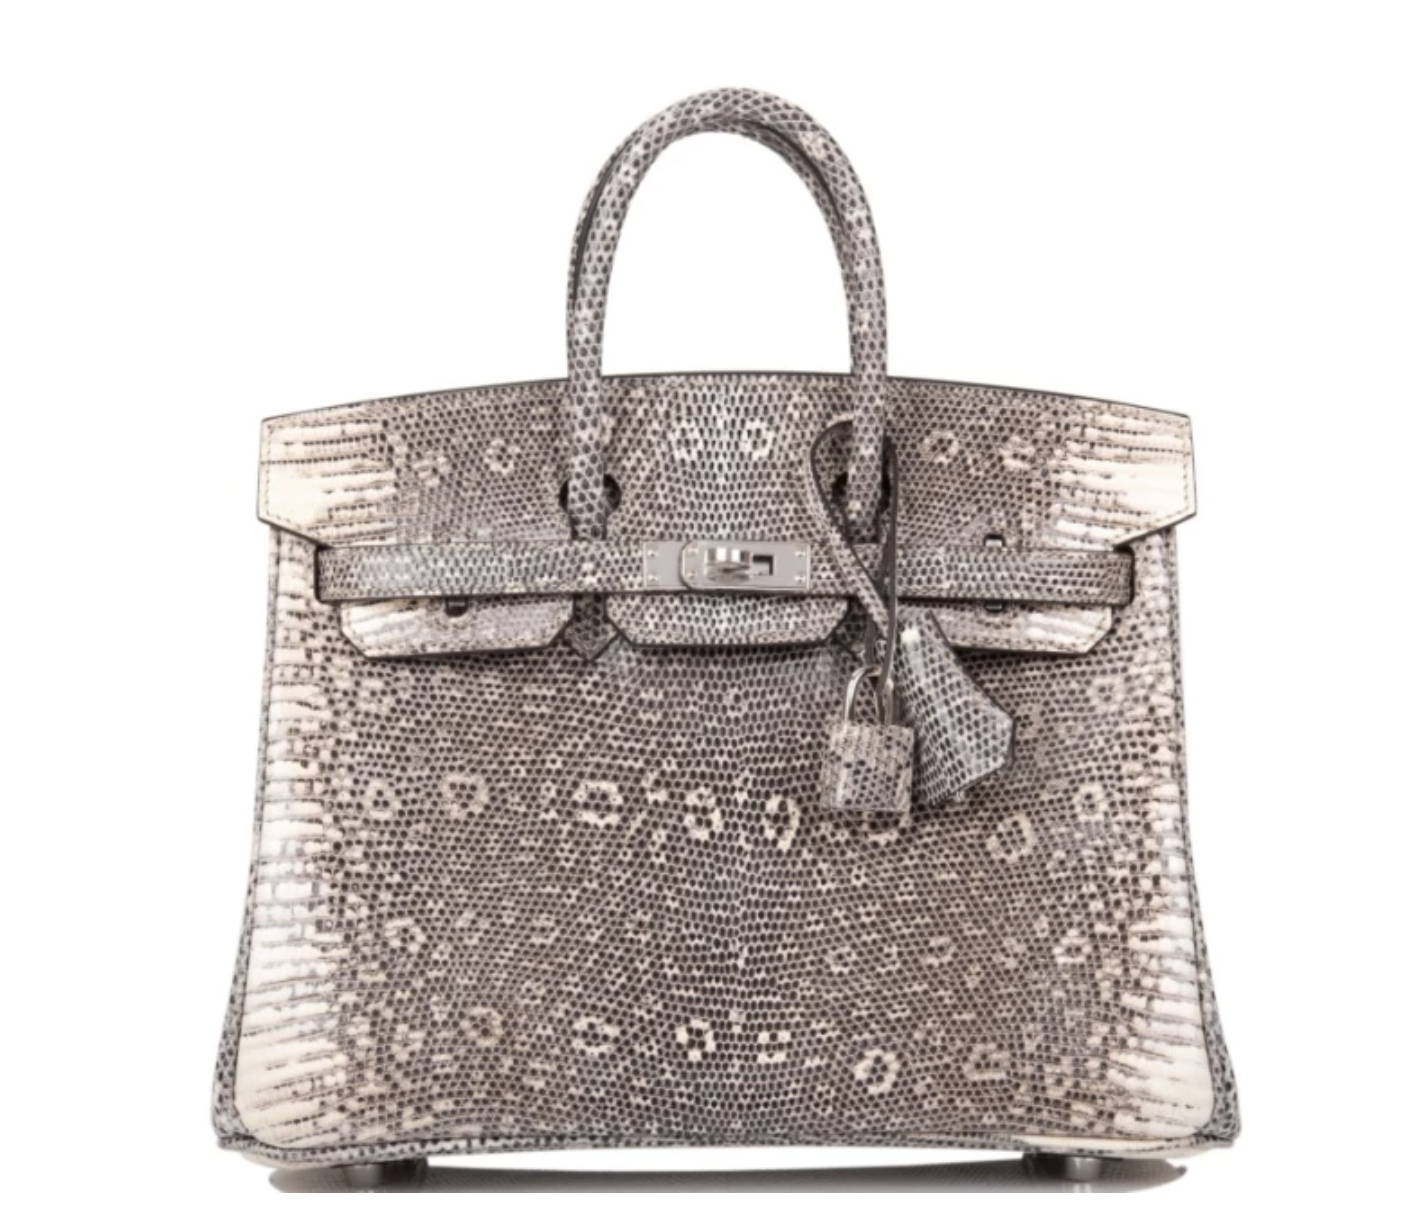 Sold at Auction: Hermes 2020 Anemone Swift Leather Kelly Retourne 25